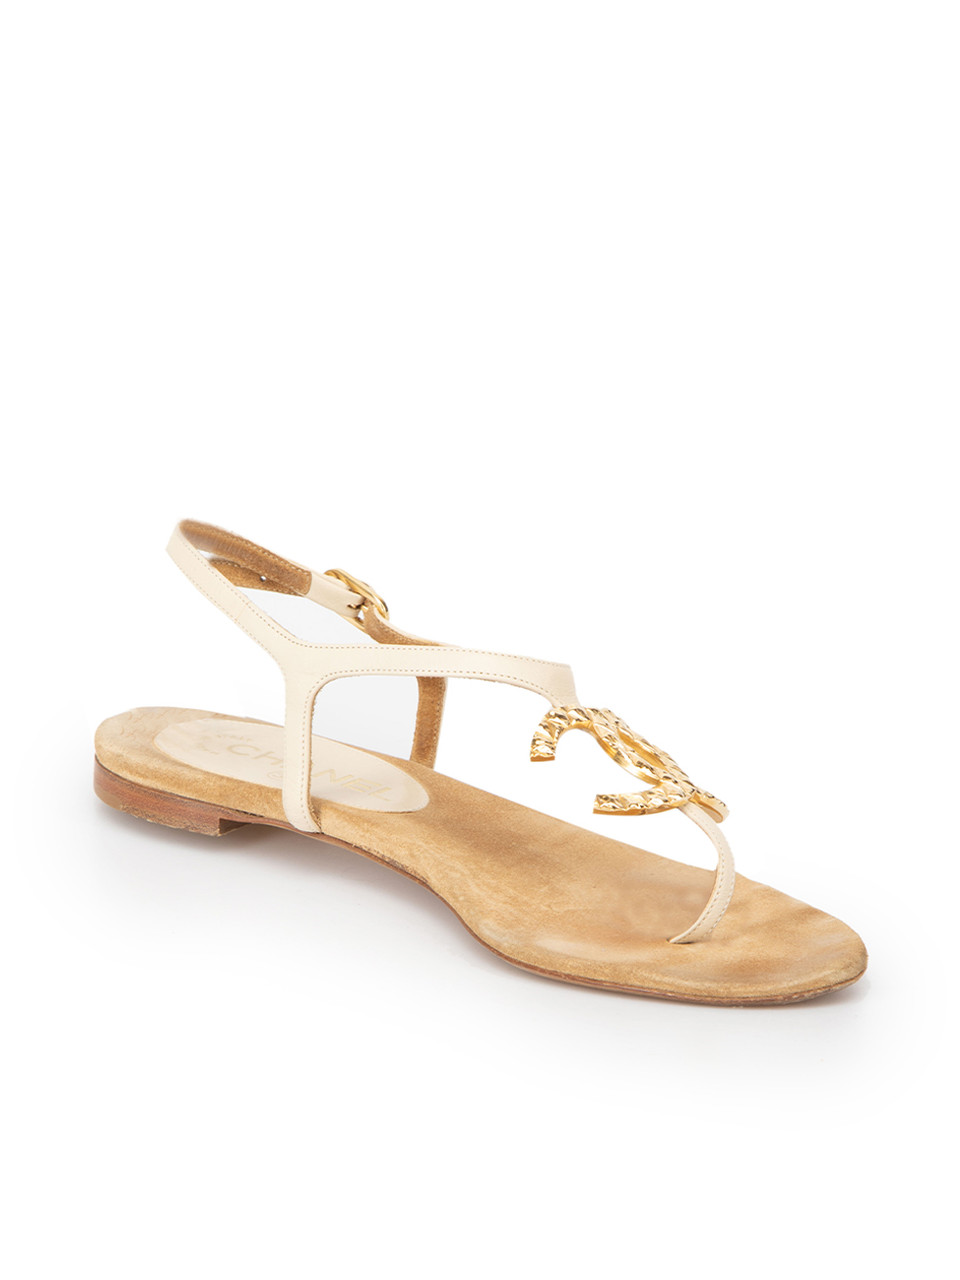 Chanel Cream Leather CC Thong Sandals